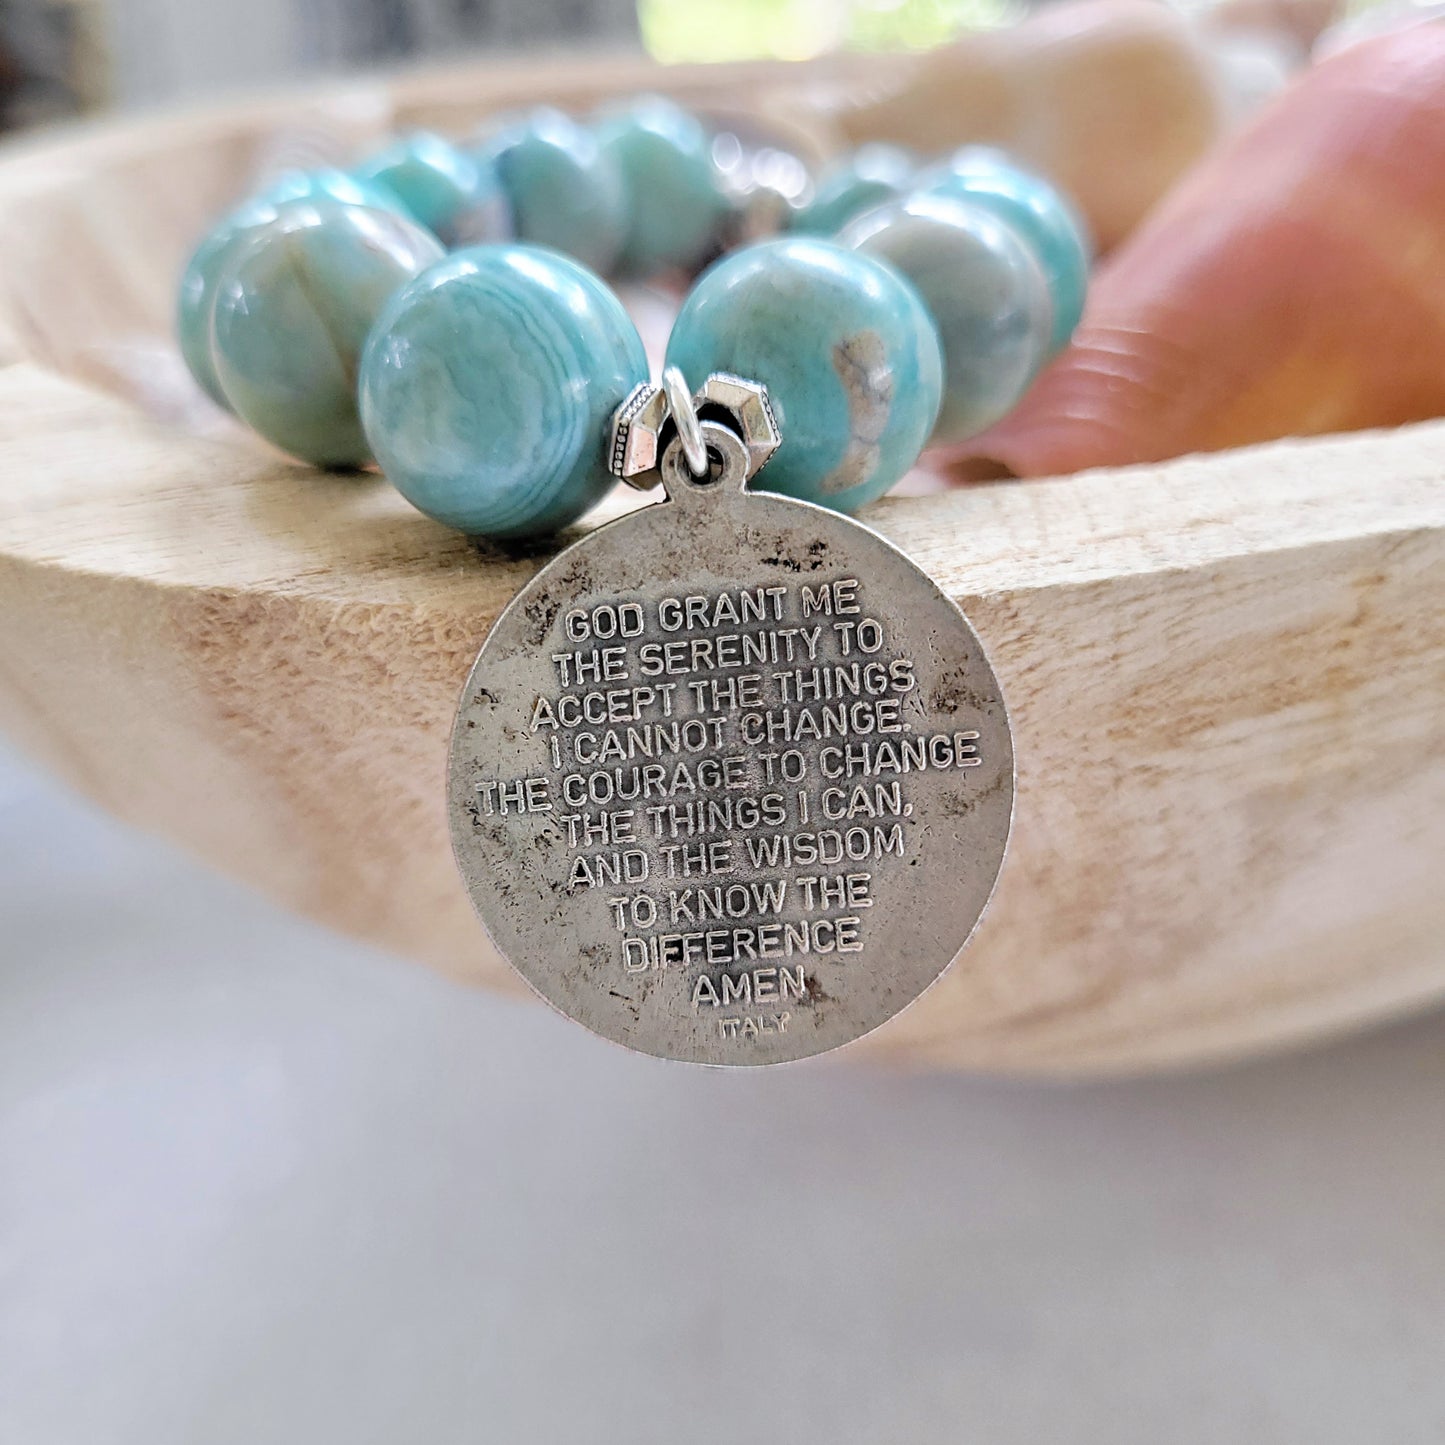 Turquoise 12mm Beaded Bracelet with Praying Hands Medal & Serenity Prayer - Afterlife Jewelry Designs